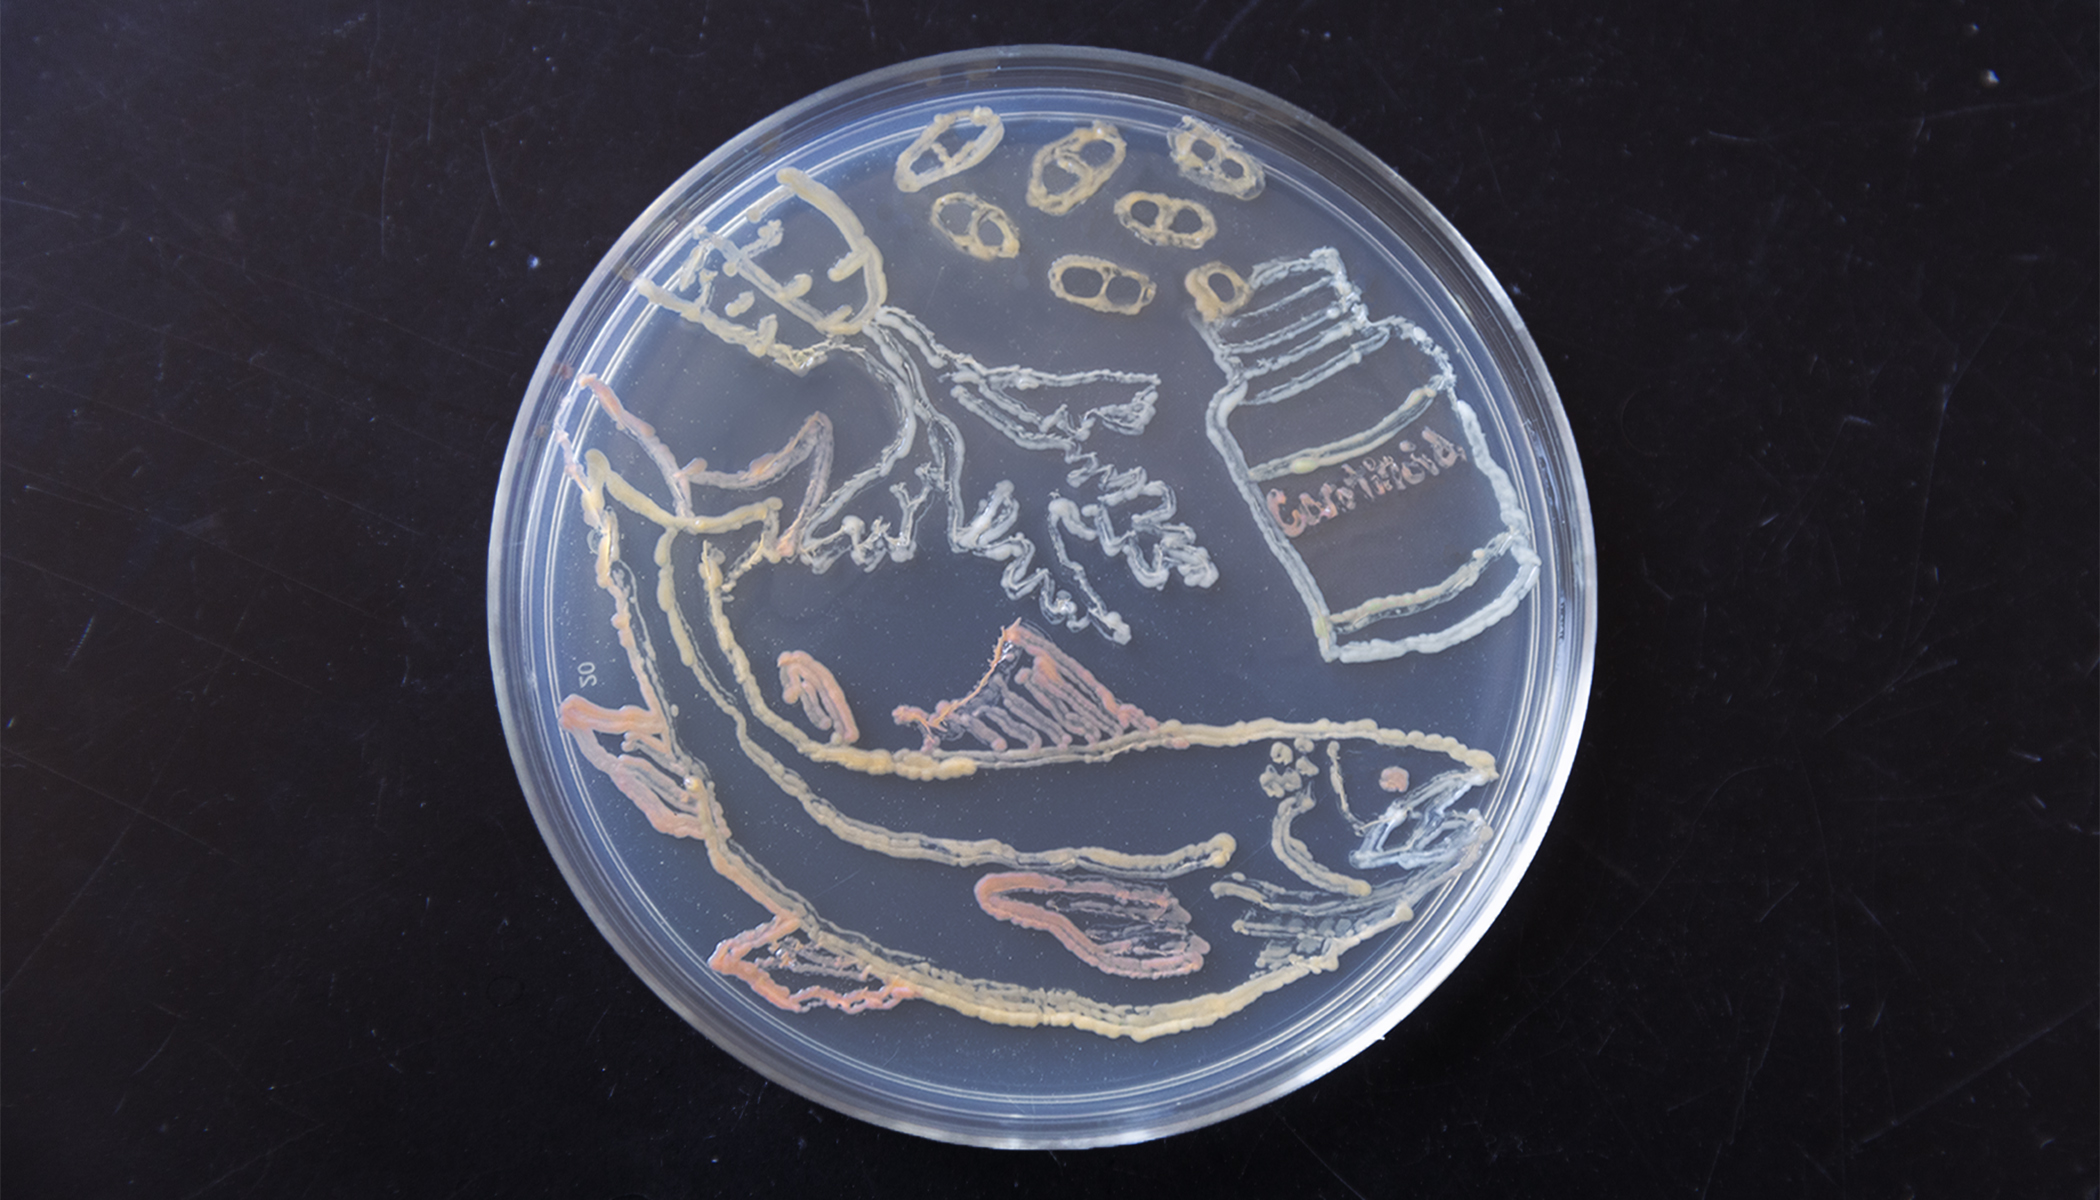 Bacteria cultured on an apgar plate in the shape of a fish, a carrot, and a bottle of pills